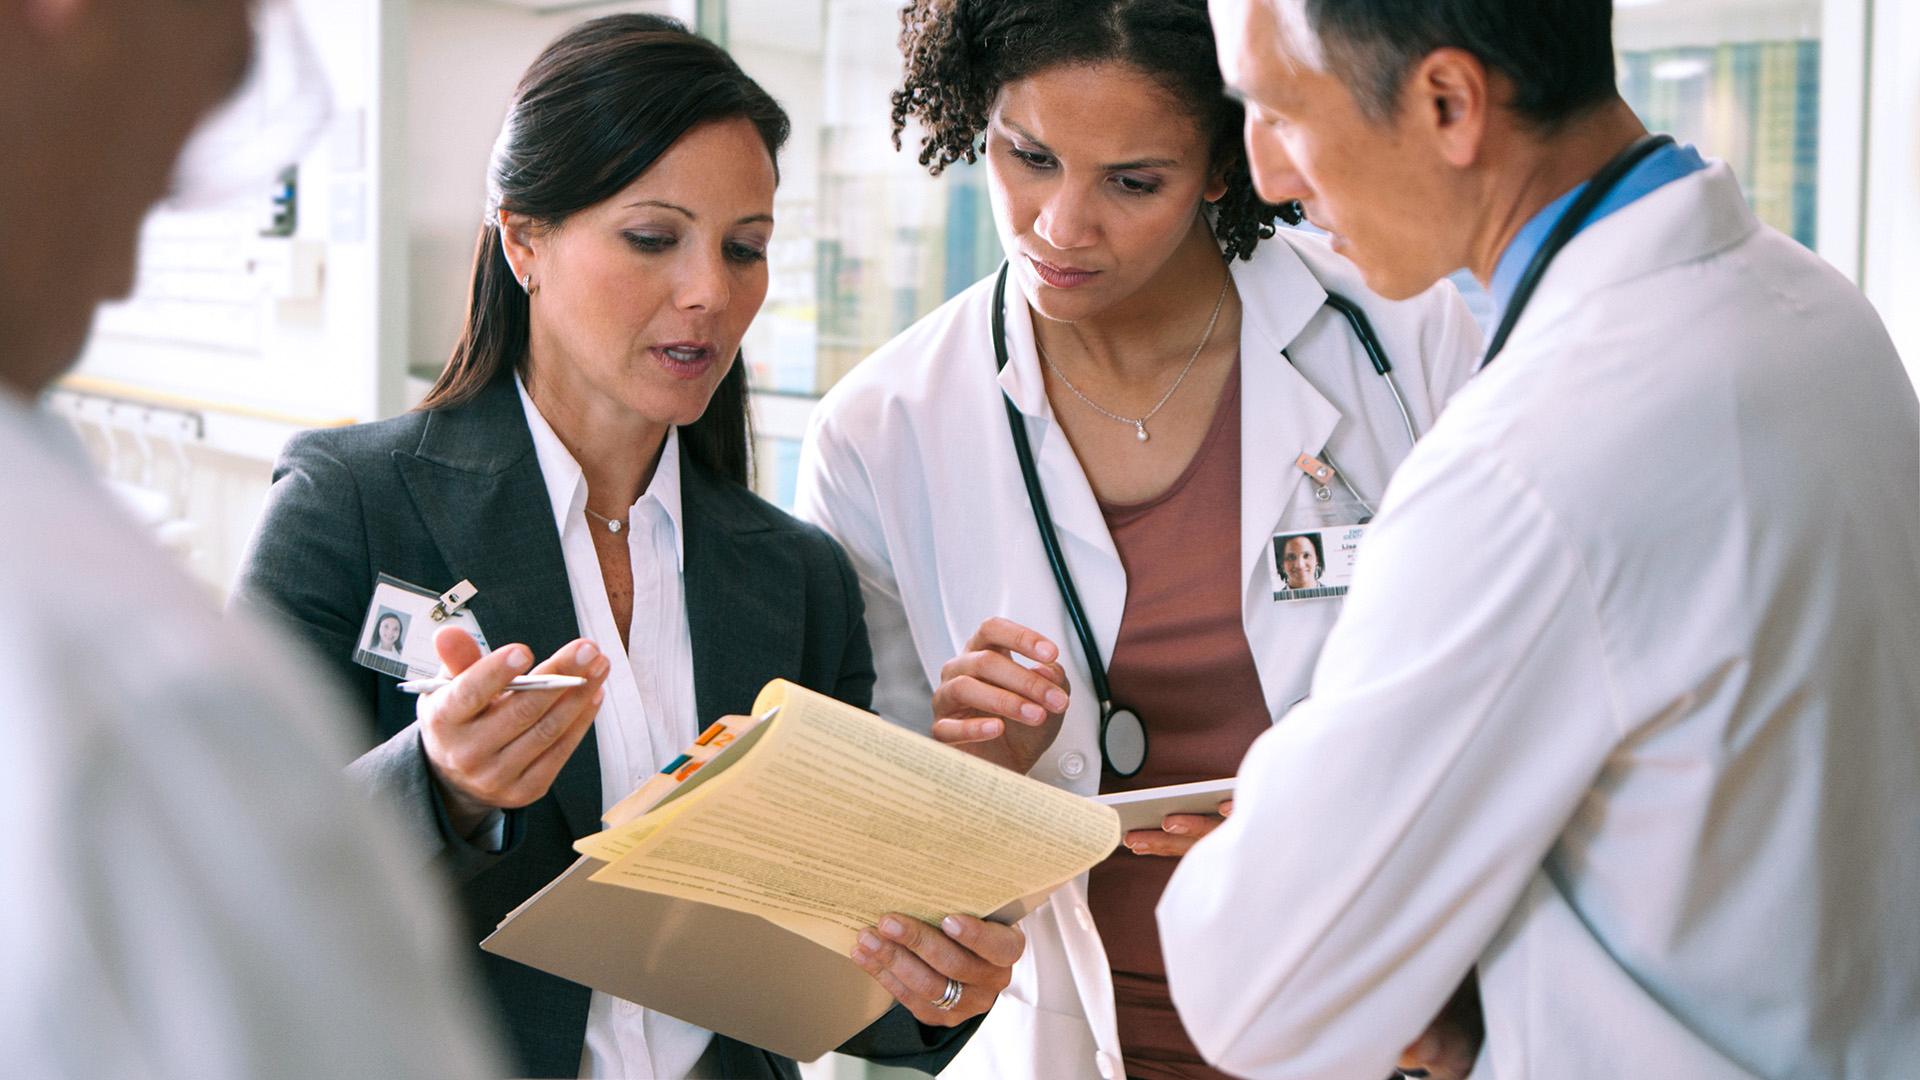 A hospital professional discussing documents with doctors.